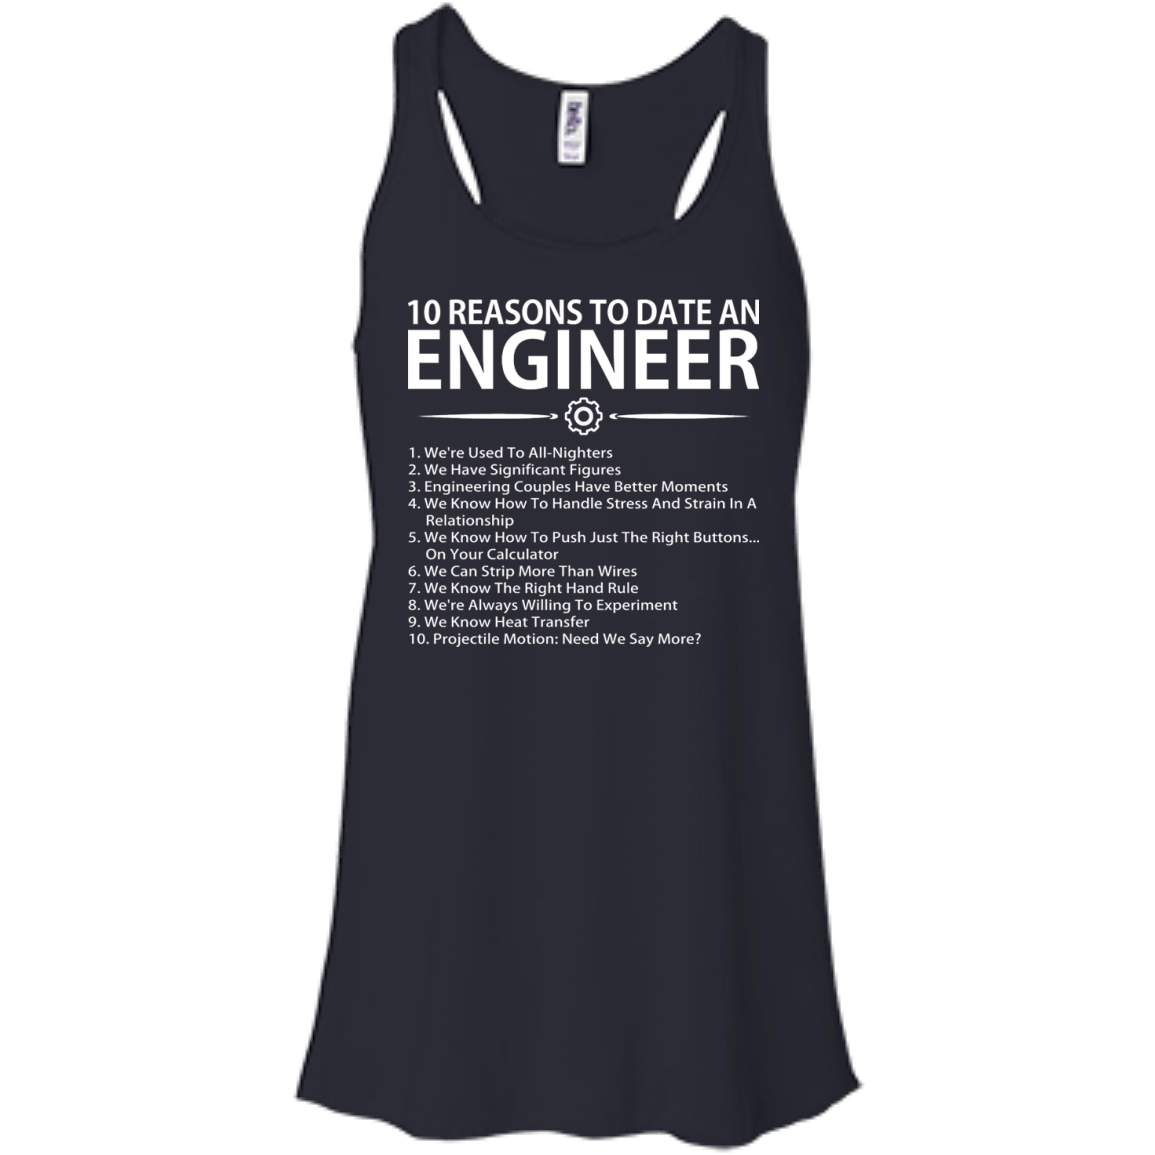 10 Reasons To Date An Engineer - Engineering Outfitters